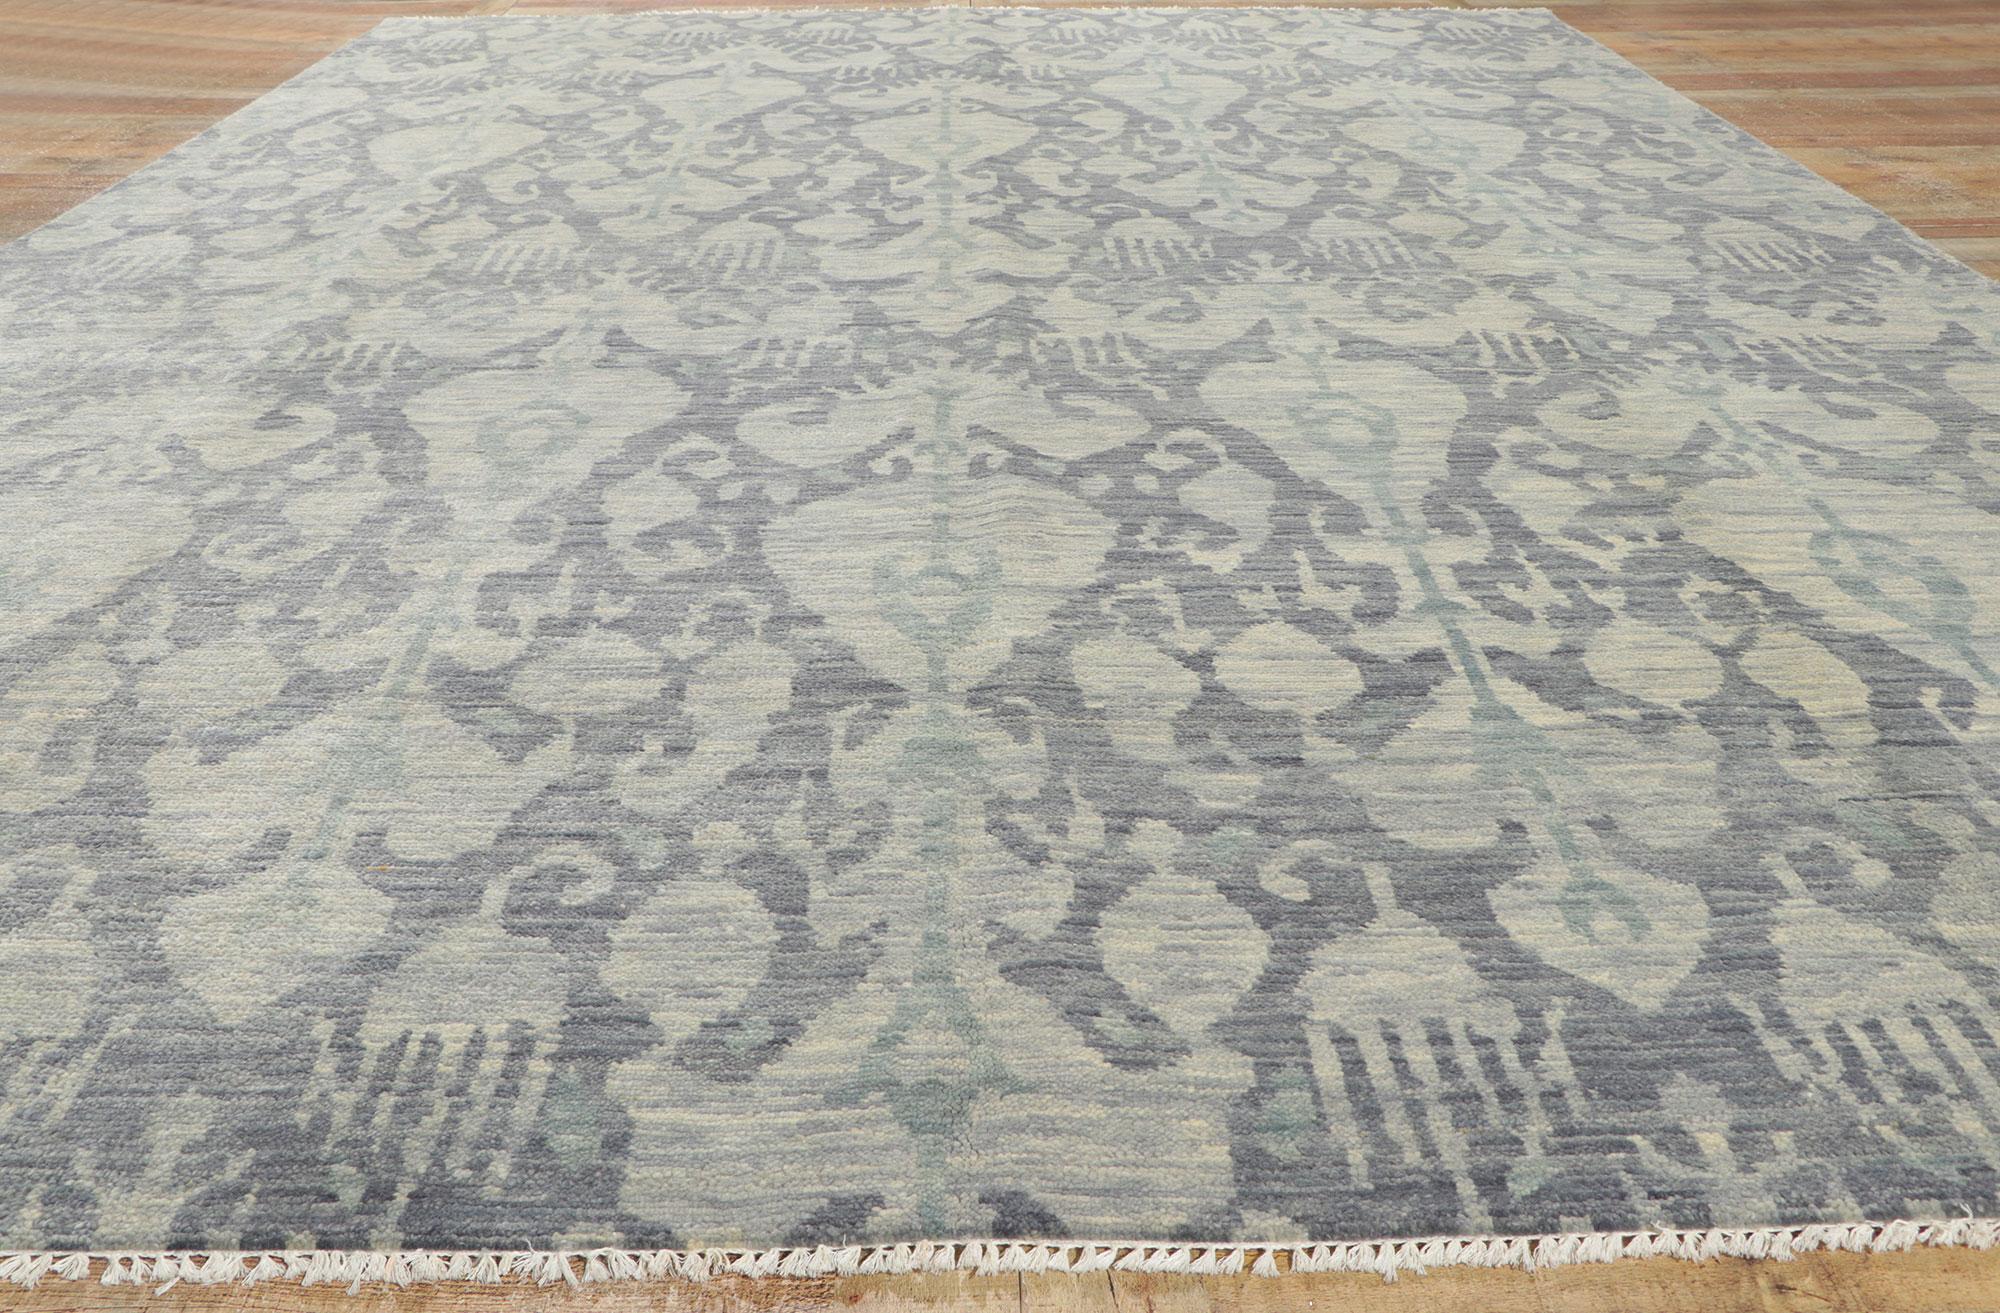 Wool New Transitional Ikat Rug with Gray and Blue Earth-Tone Colors For Sale